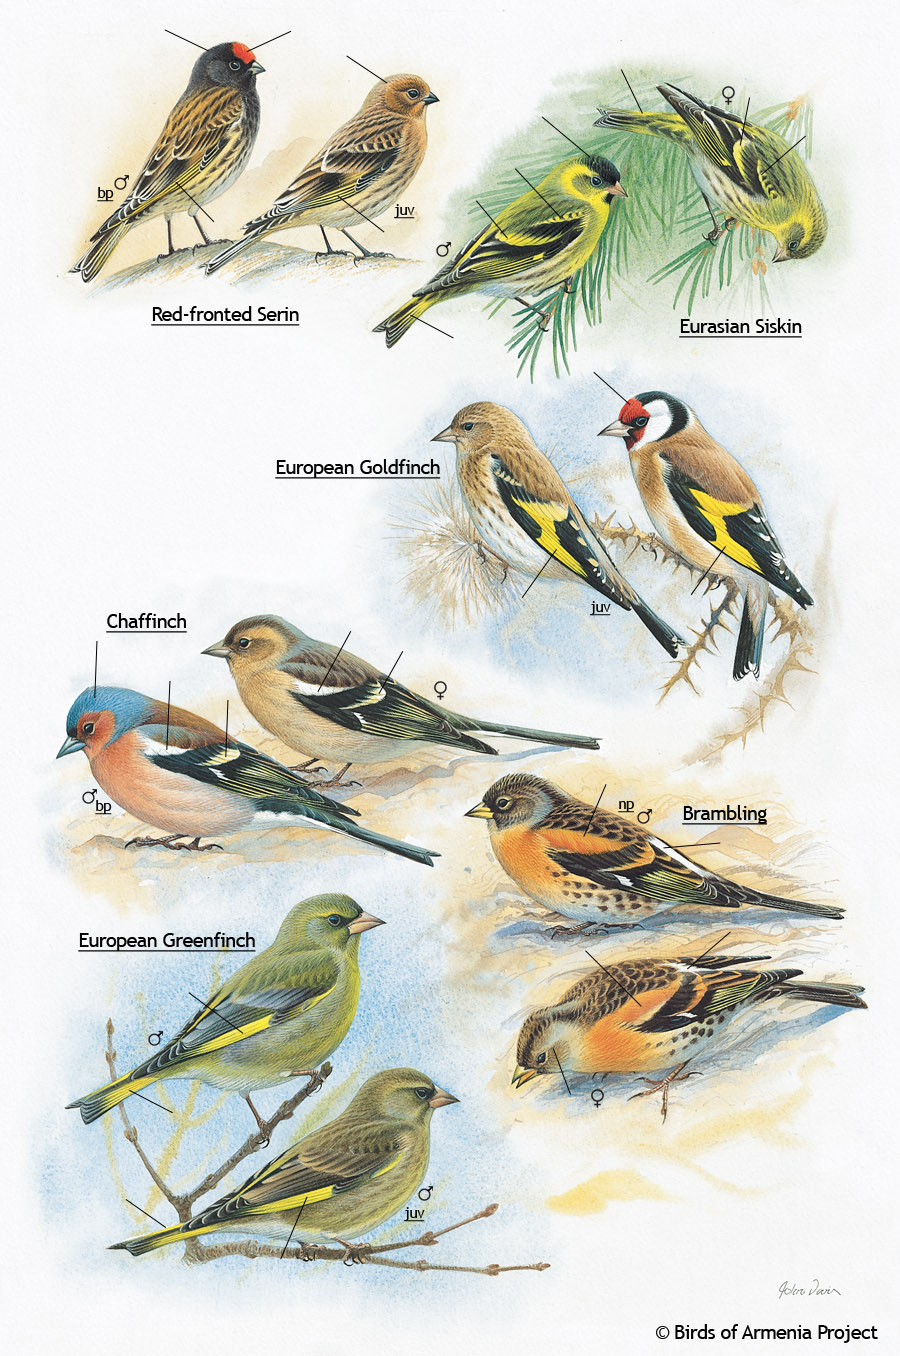 Serins, Siskins, Goldfinches, Chaffinches, Greenfinches and Bramblings